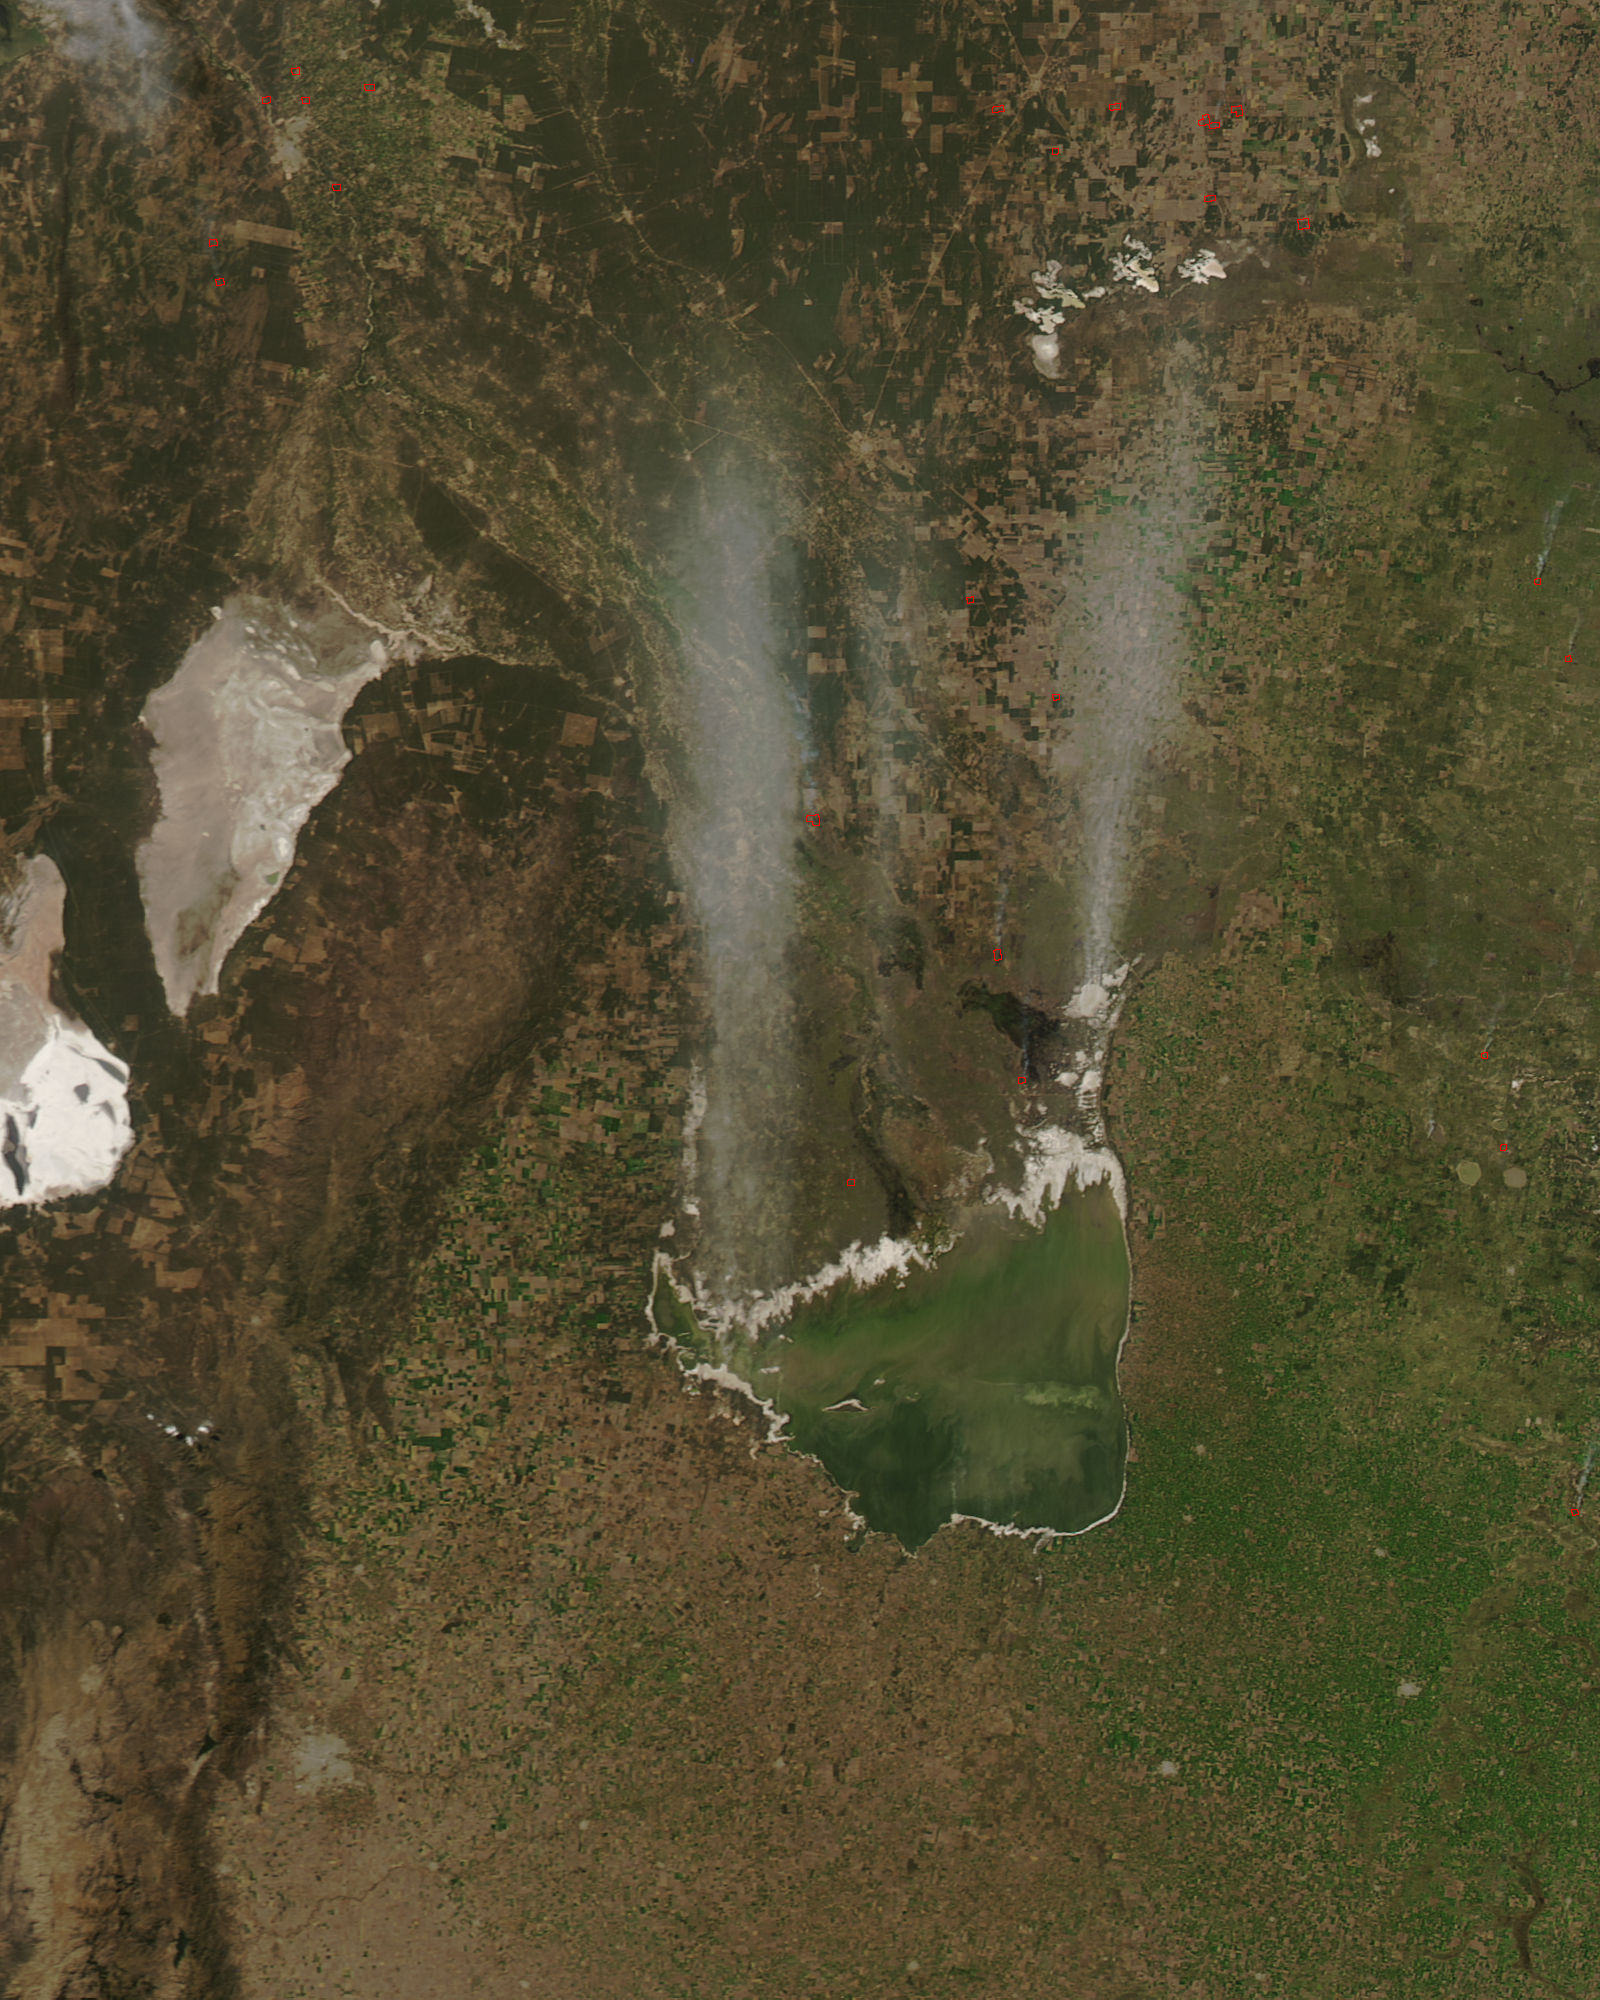 Dust storm near Laguna Mar Chiquita, Argentina - related image preview